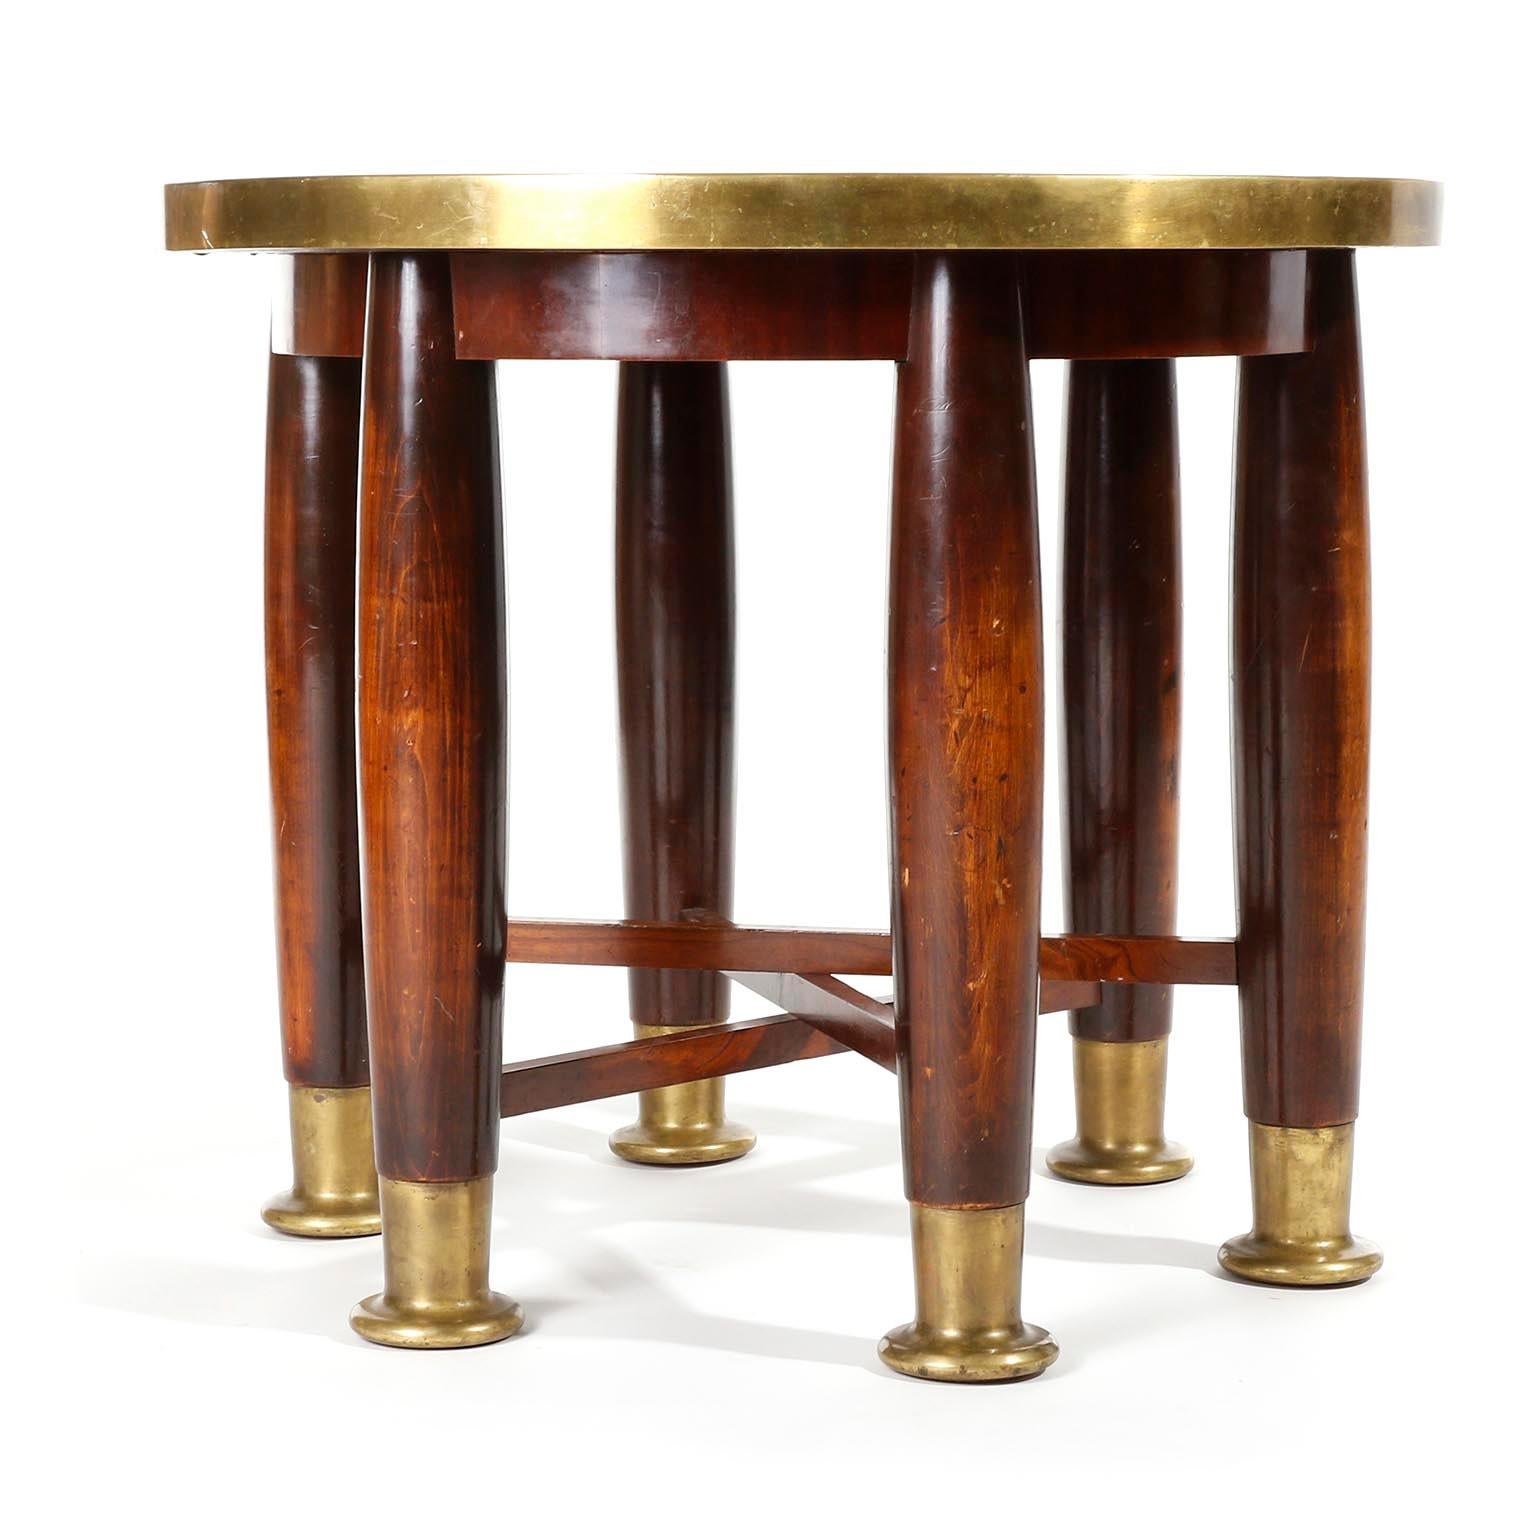 A fantastic and extremely rare 'Haberfeld' table with six legs manufactured by Friedrich Otto Schmidt, Vienna, in 1900s.
It is made of walnut stained wood with brass shoes and a brass surrounded top.
The finish is French polished, a technique that